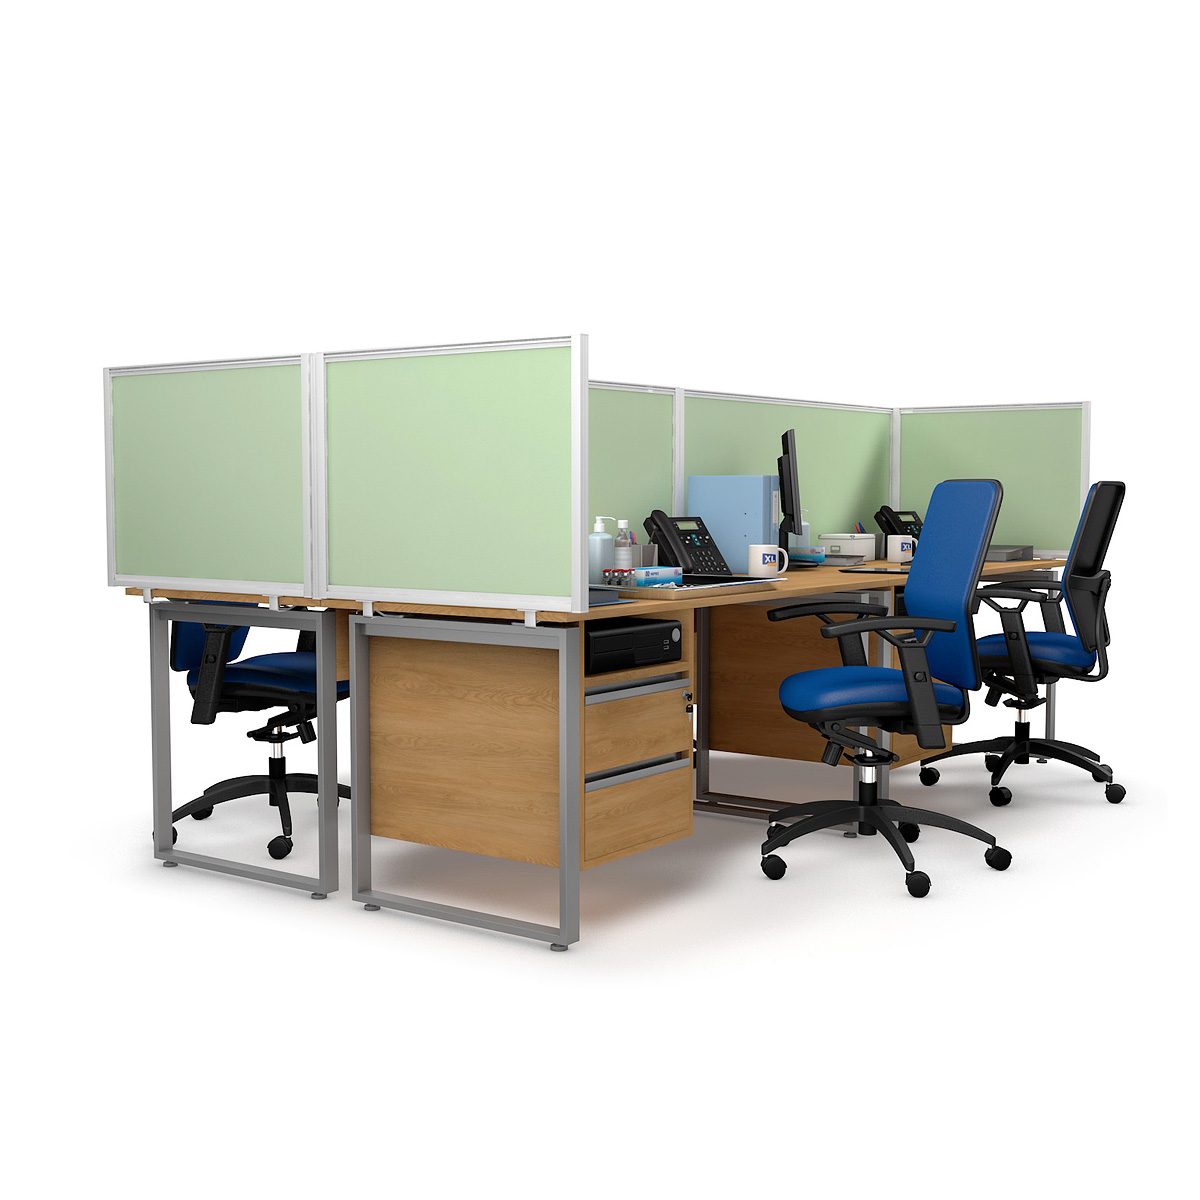 FRONTIER® Medical Screens Anti-Microbial Desk Dividers